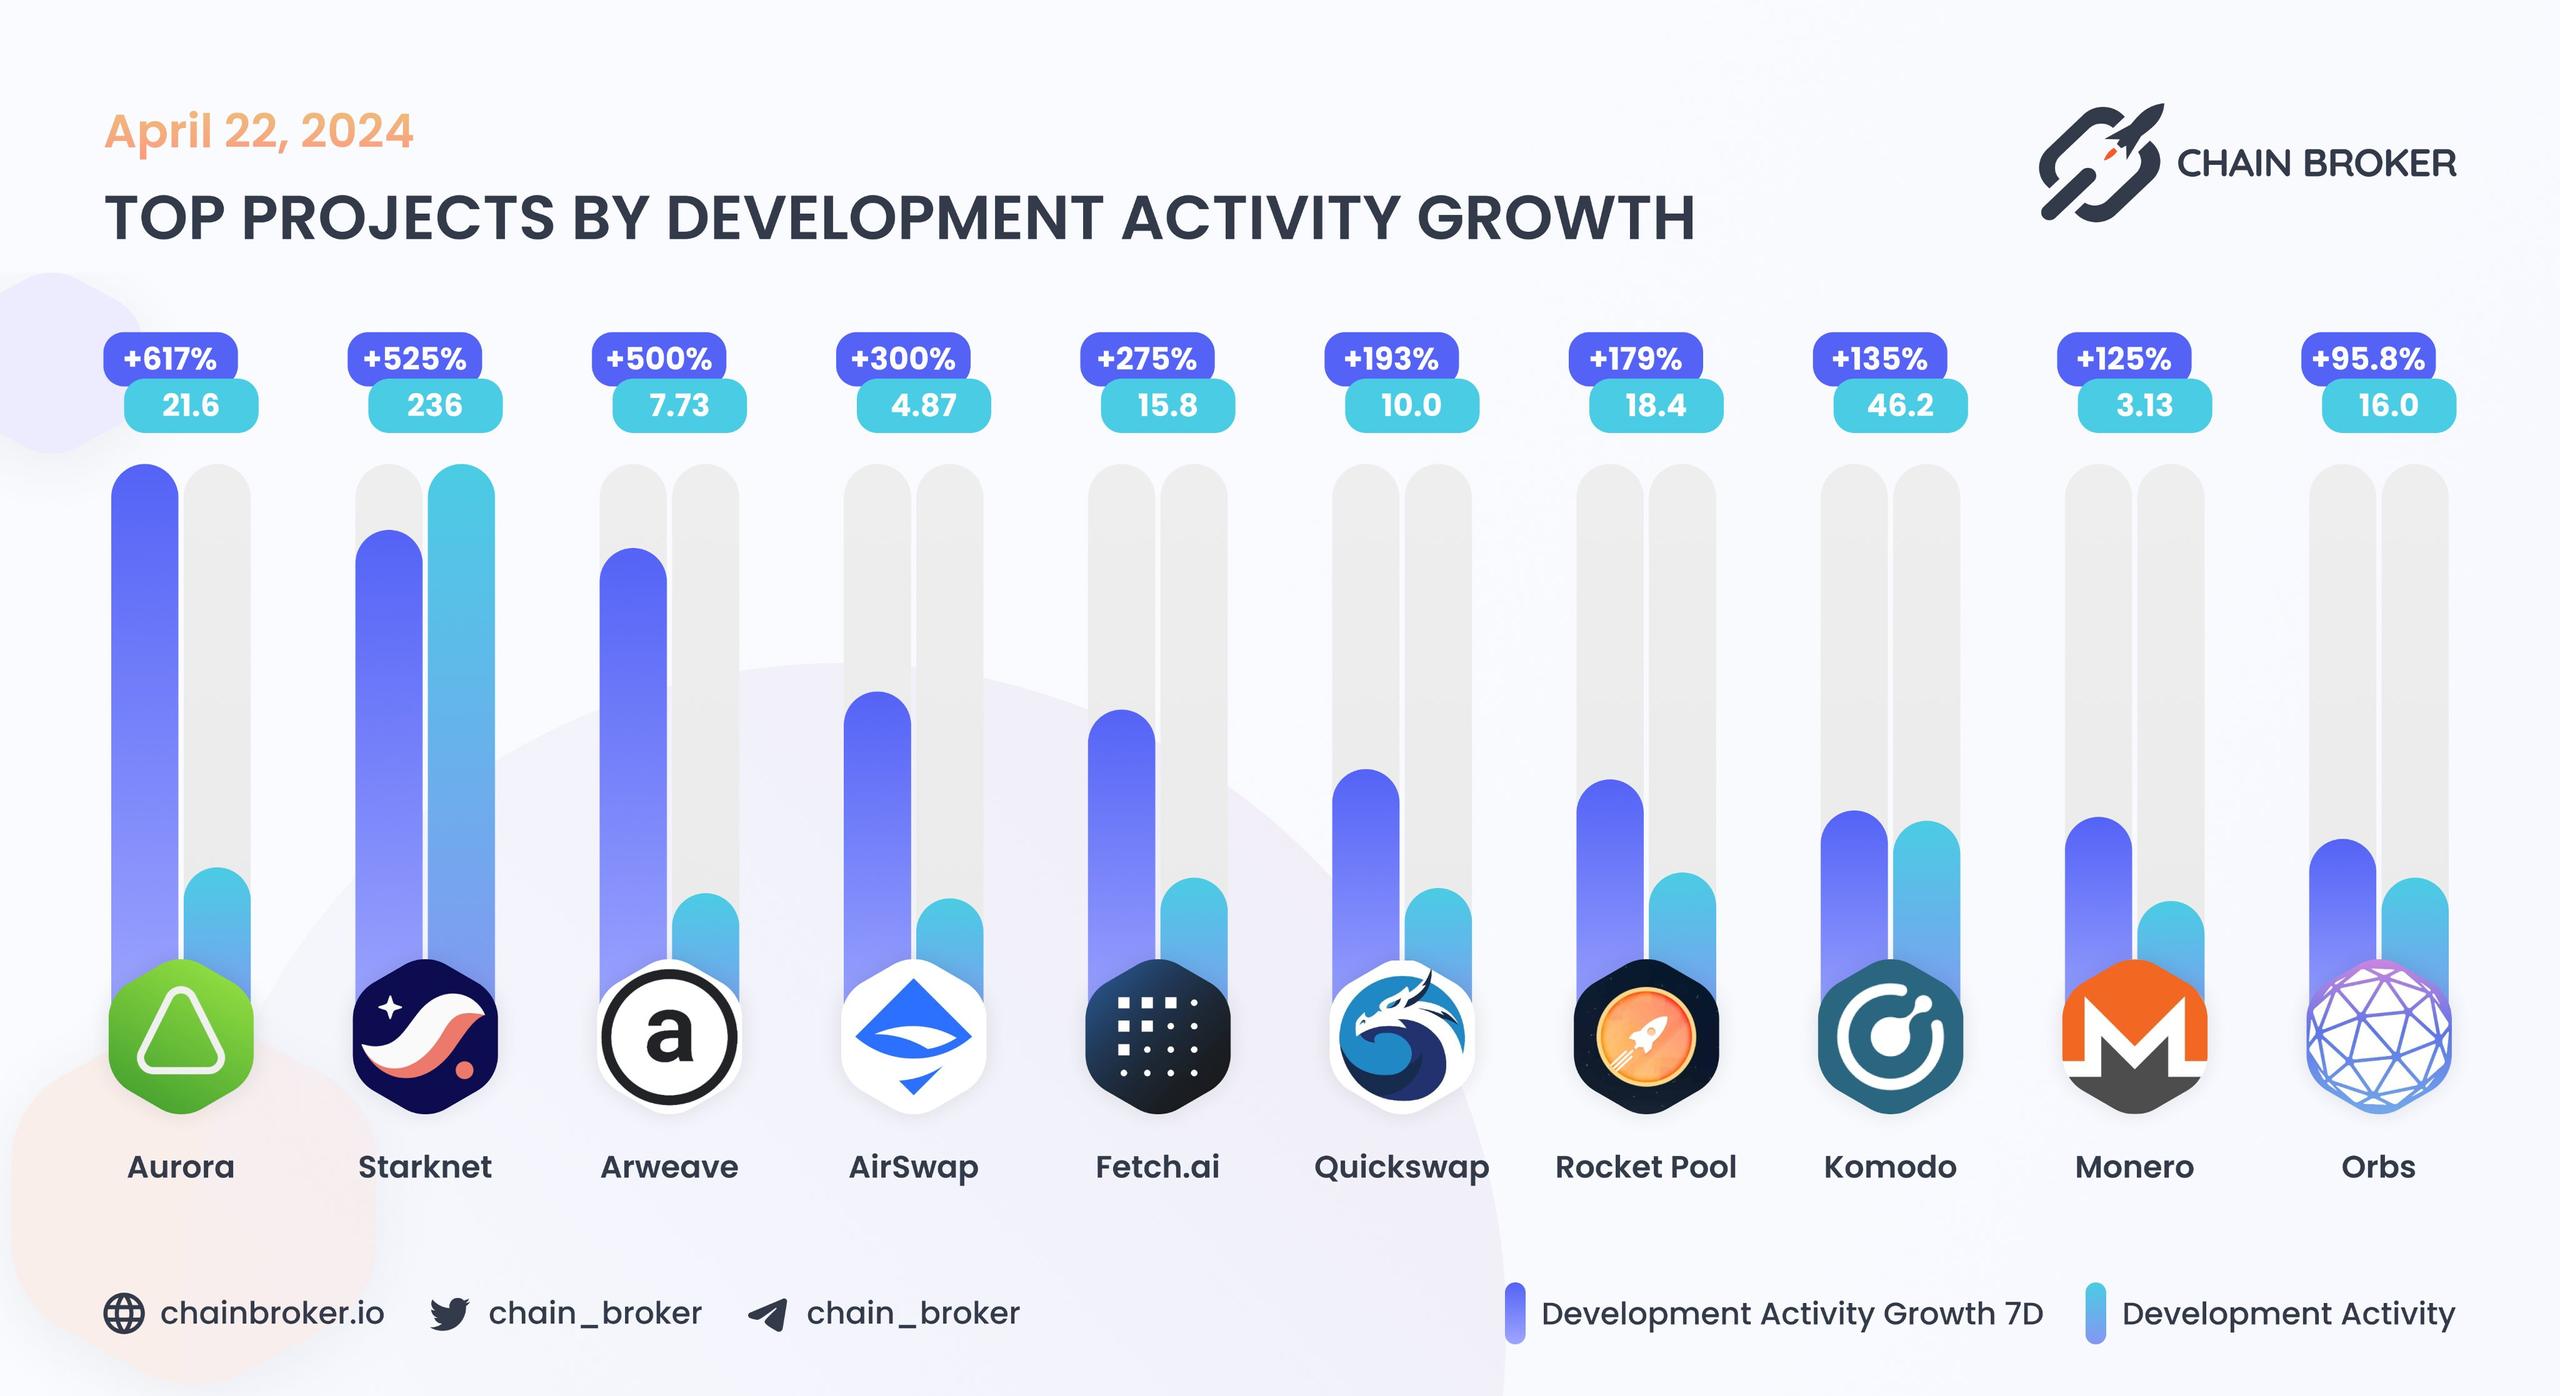 Top projects by development activity growth